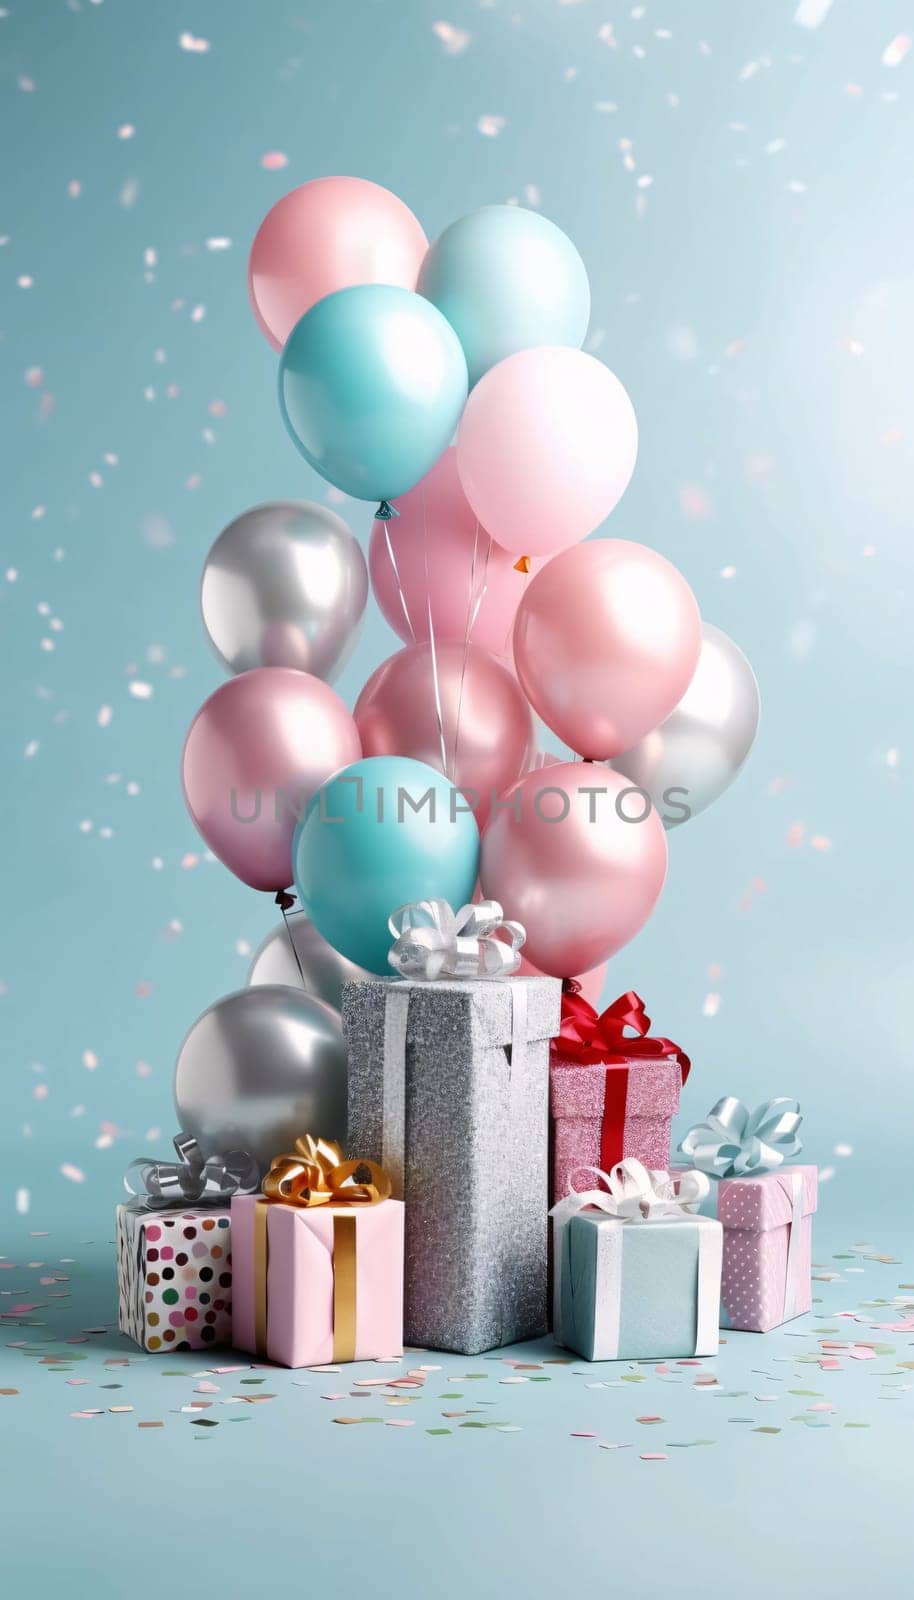 Silver and blue balloons and gifts with bow, confetti, bright background.Valentine's Day banner with space for your own content. by ThemesS